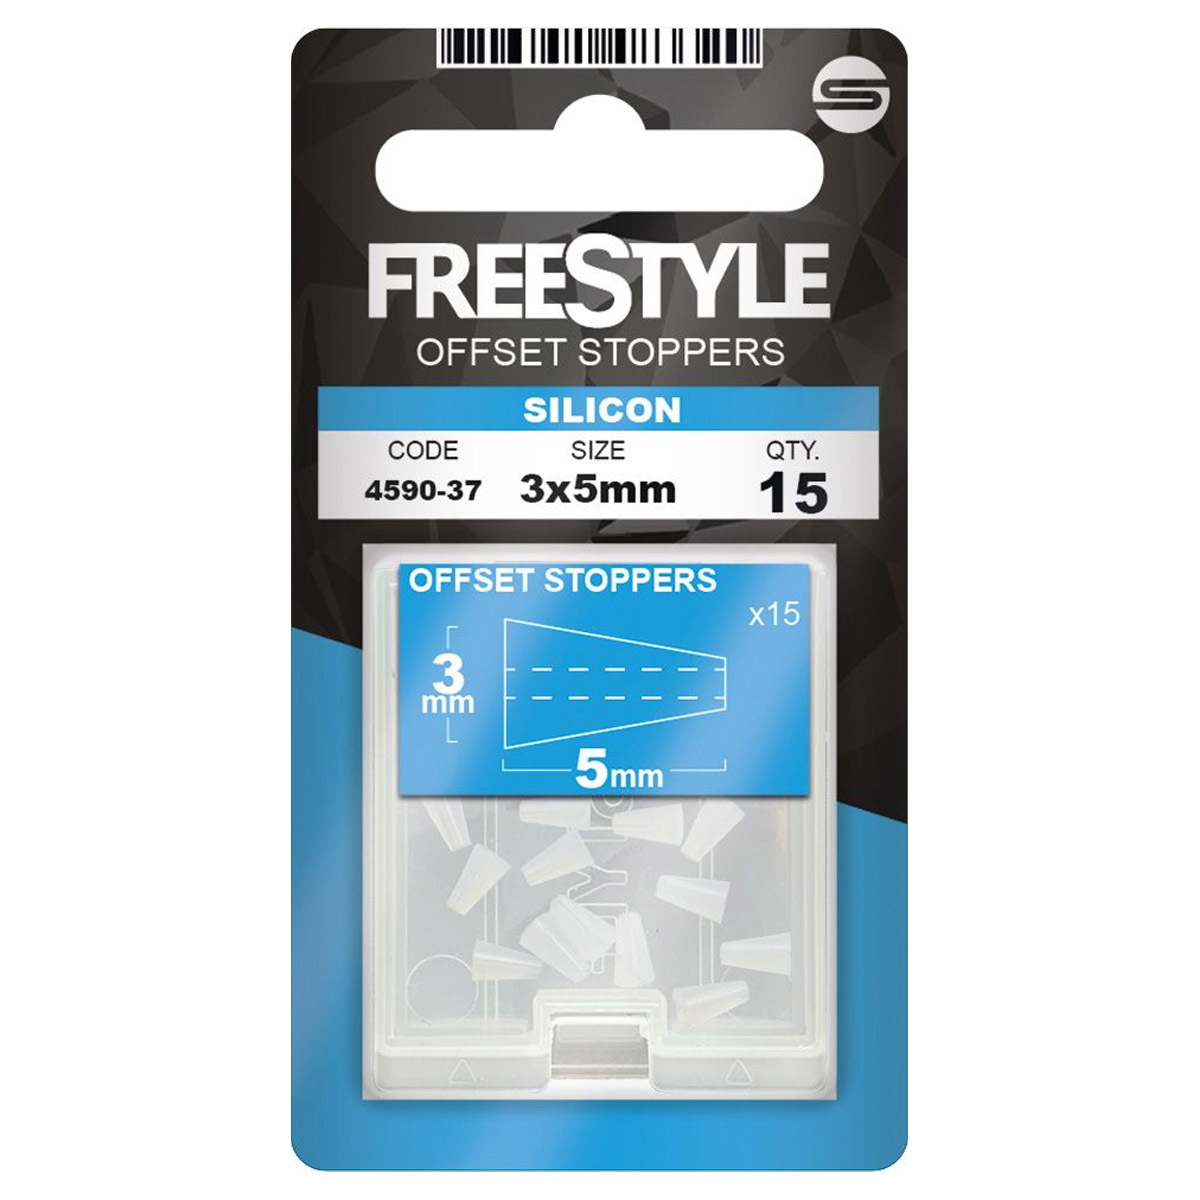 Spro Freestyle Reload Offset Stopper